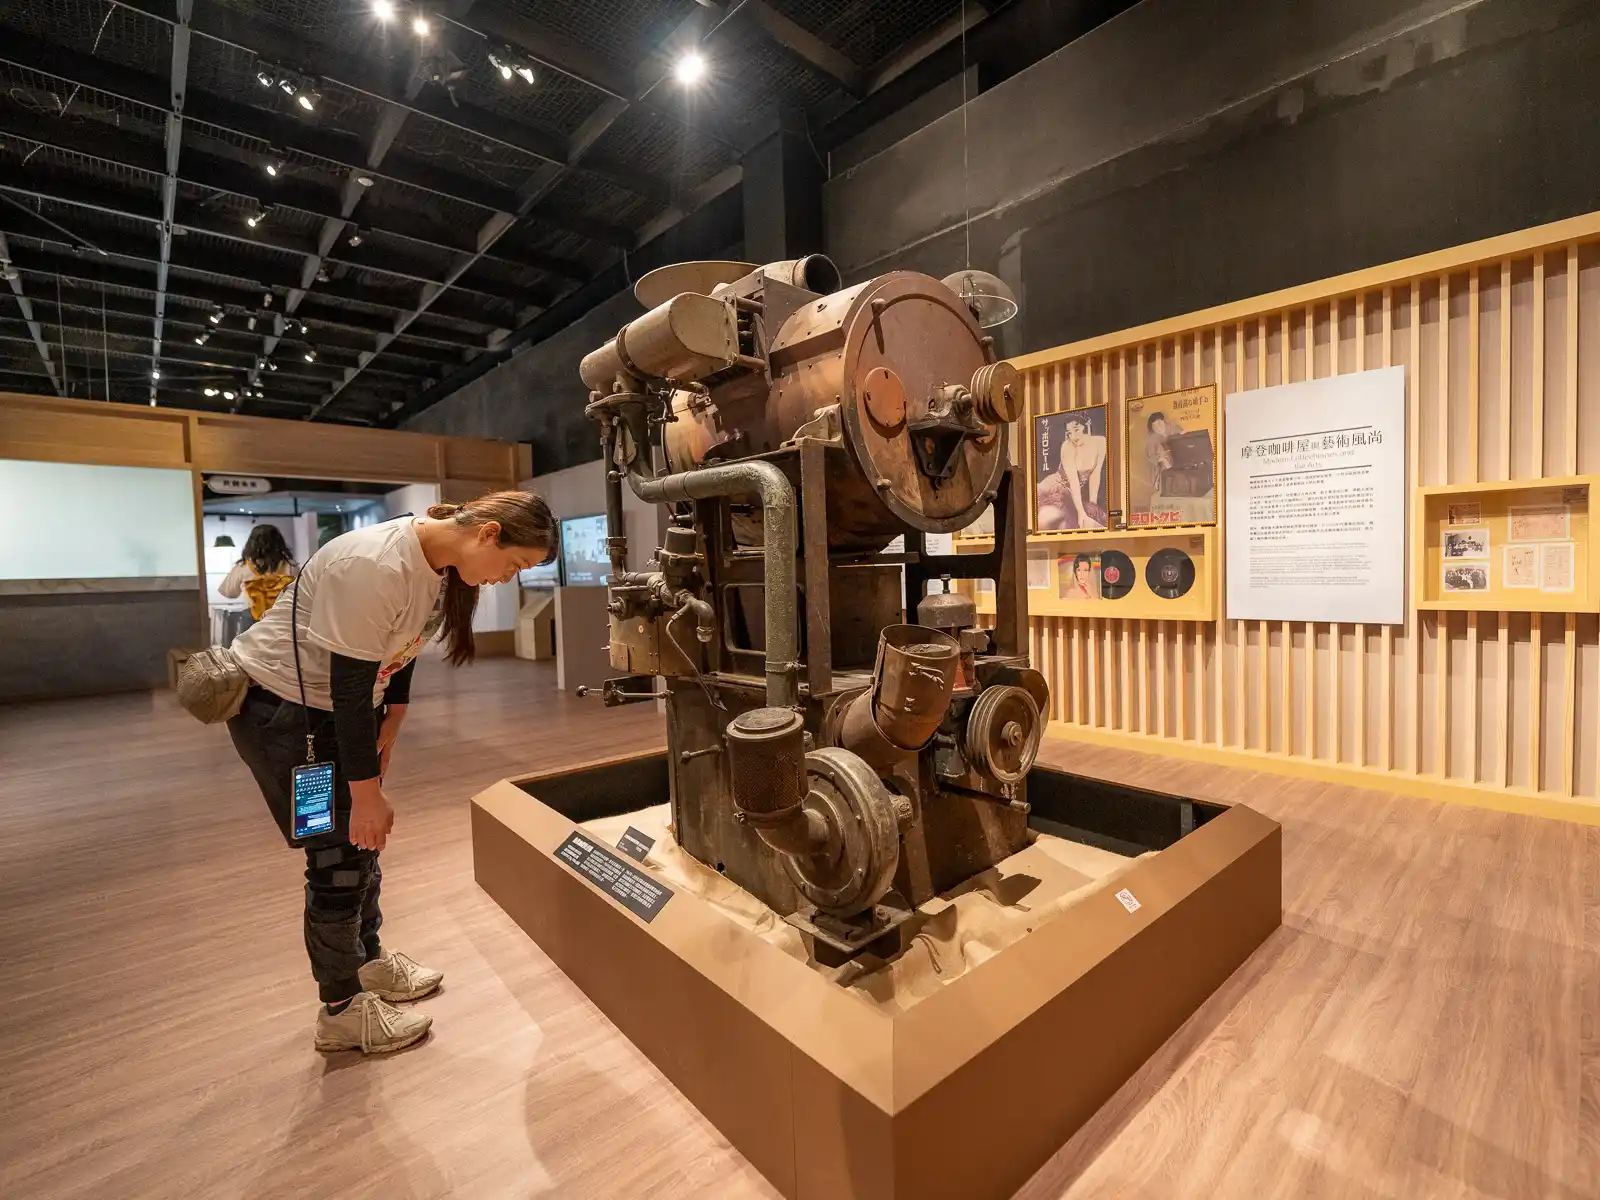 An extremely old and rusted coffee roasting machine is on display.